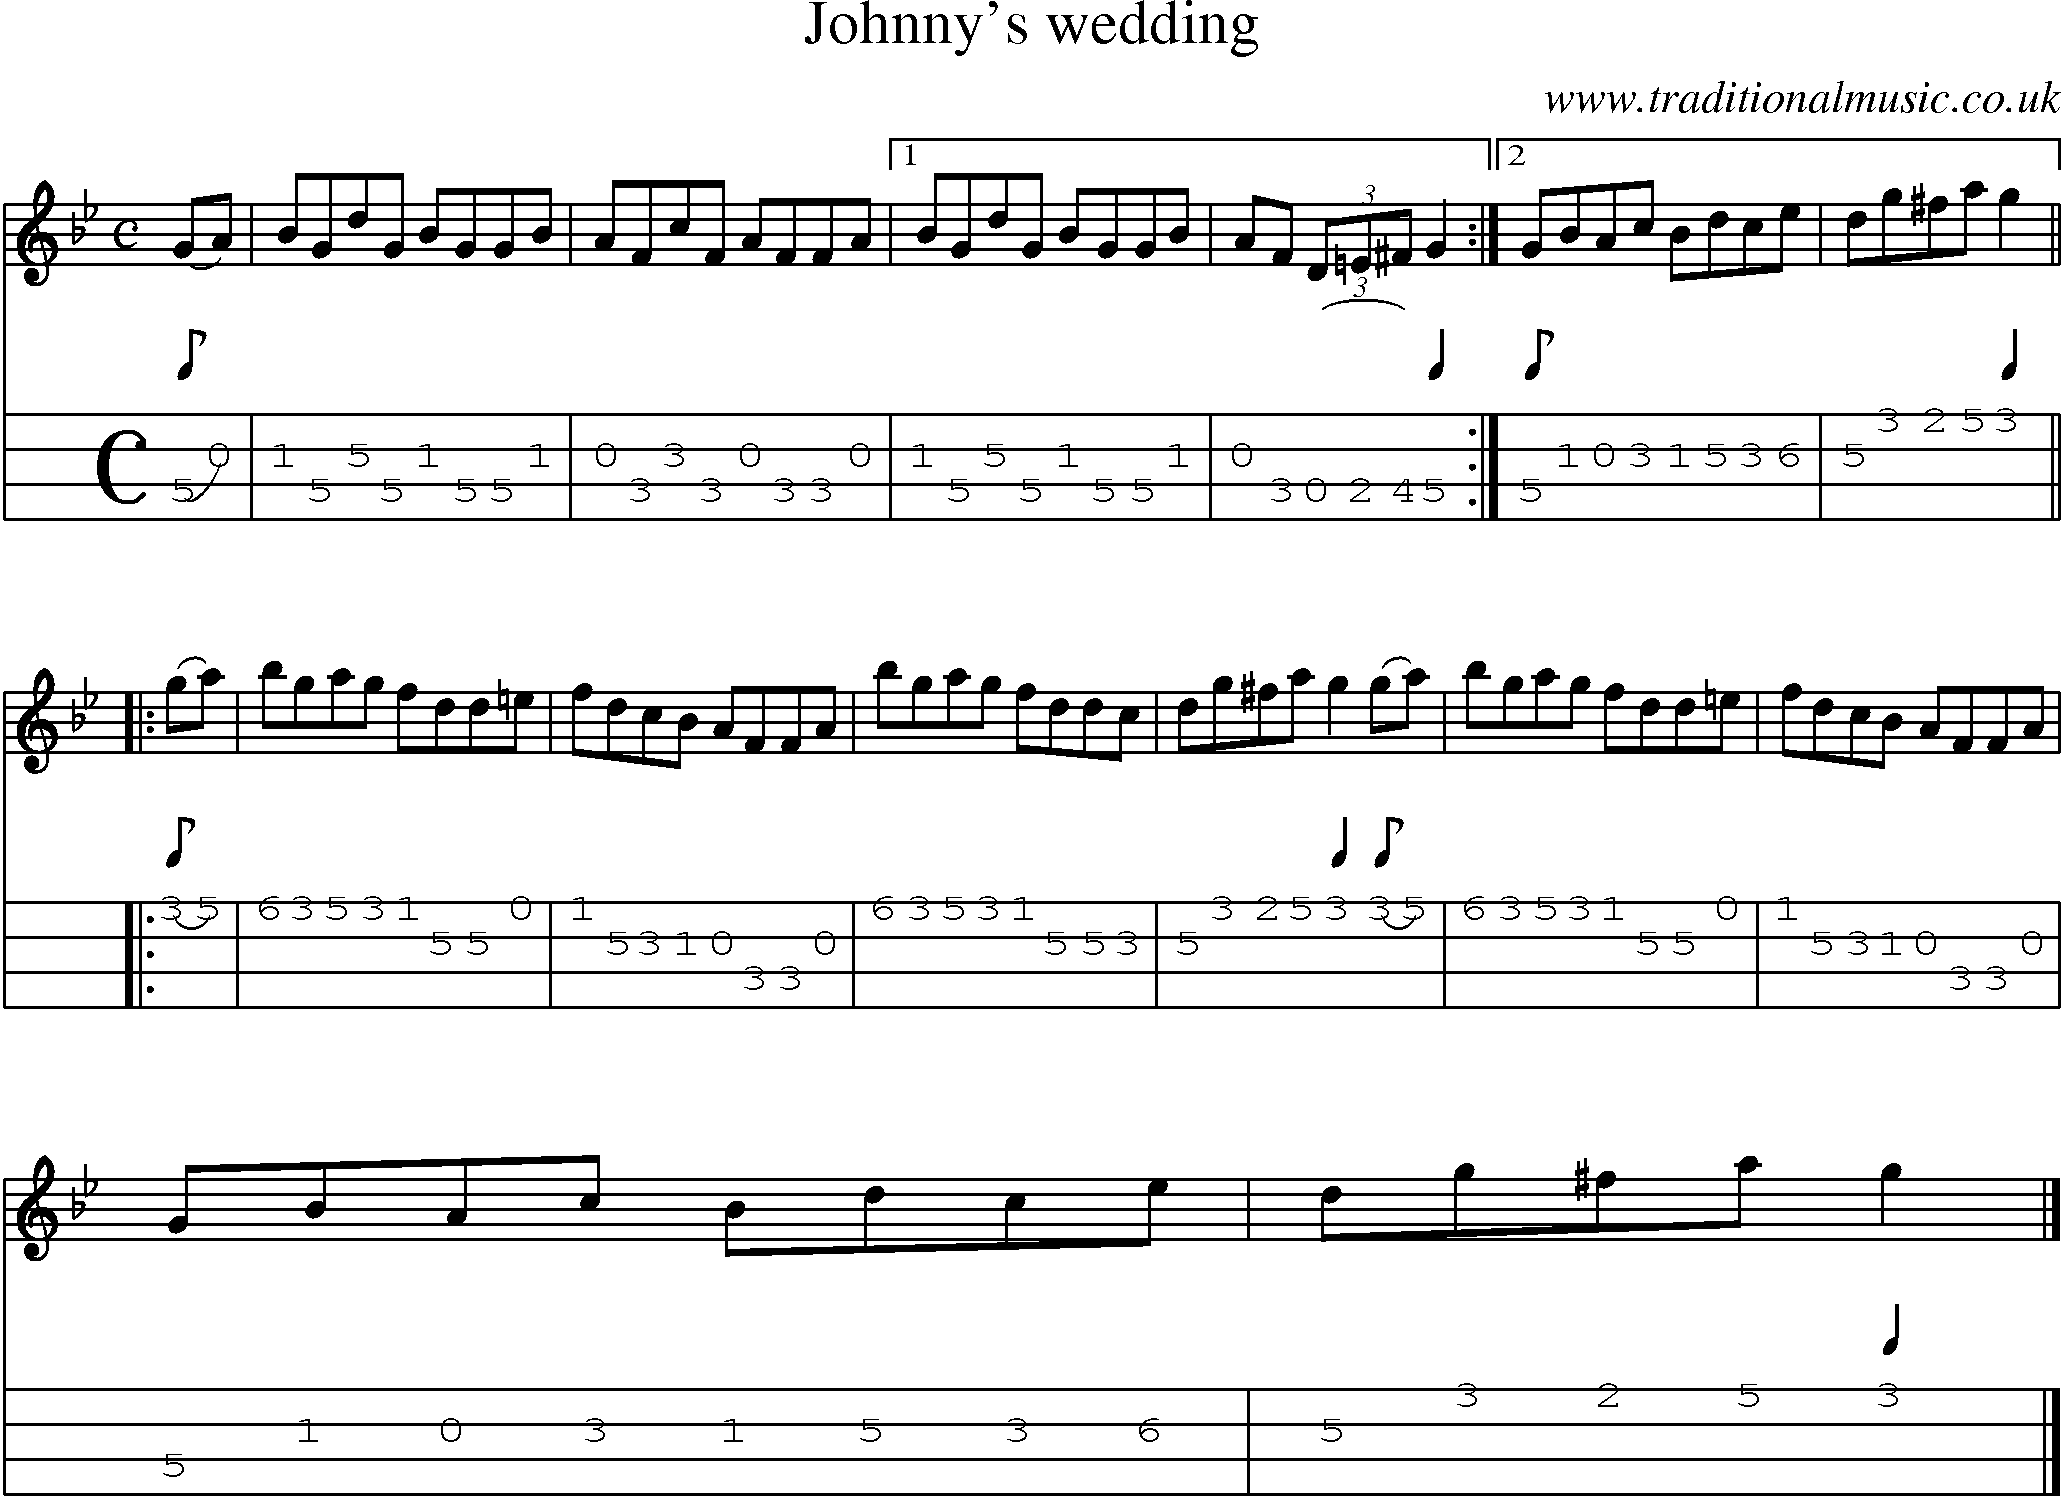 Music Score and Mandolin Tabs for Johnnys Wedding